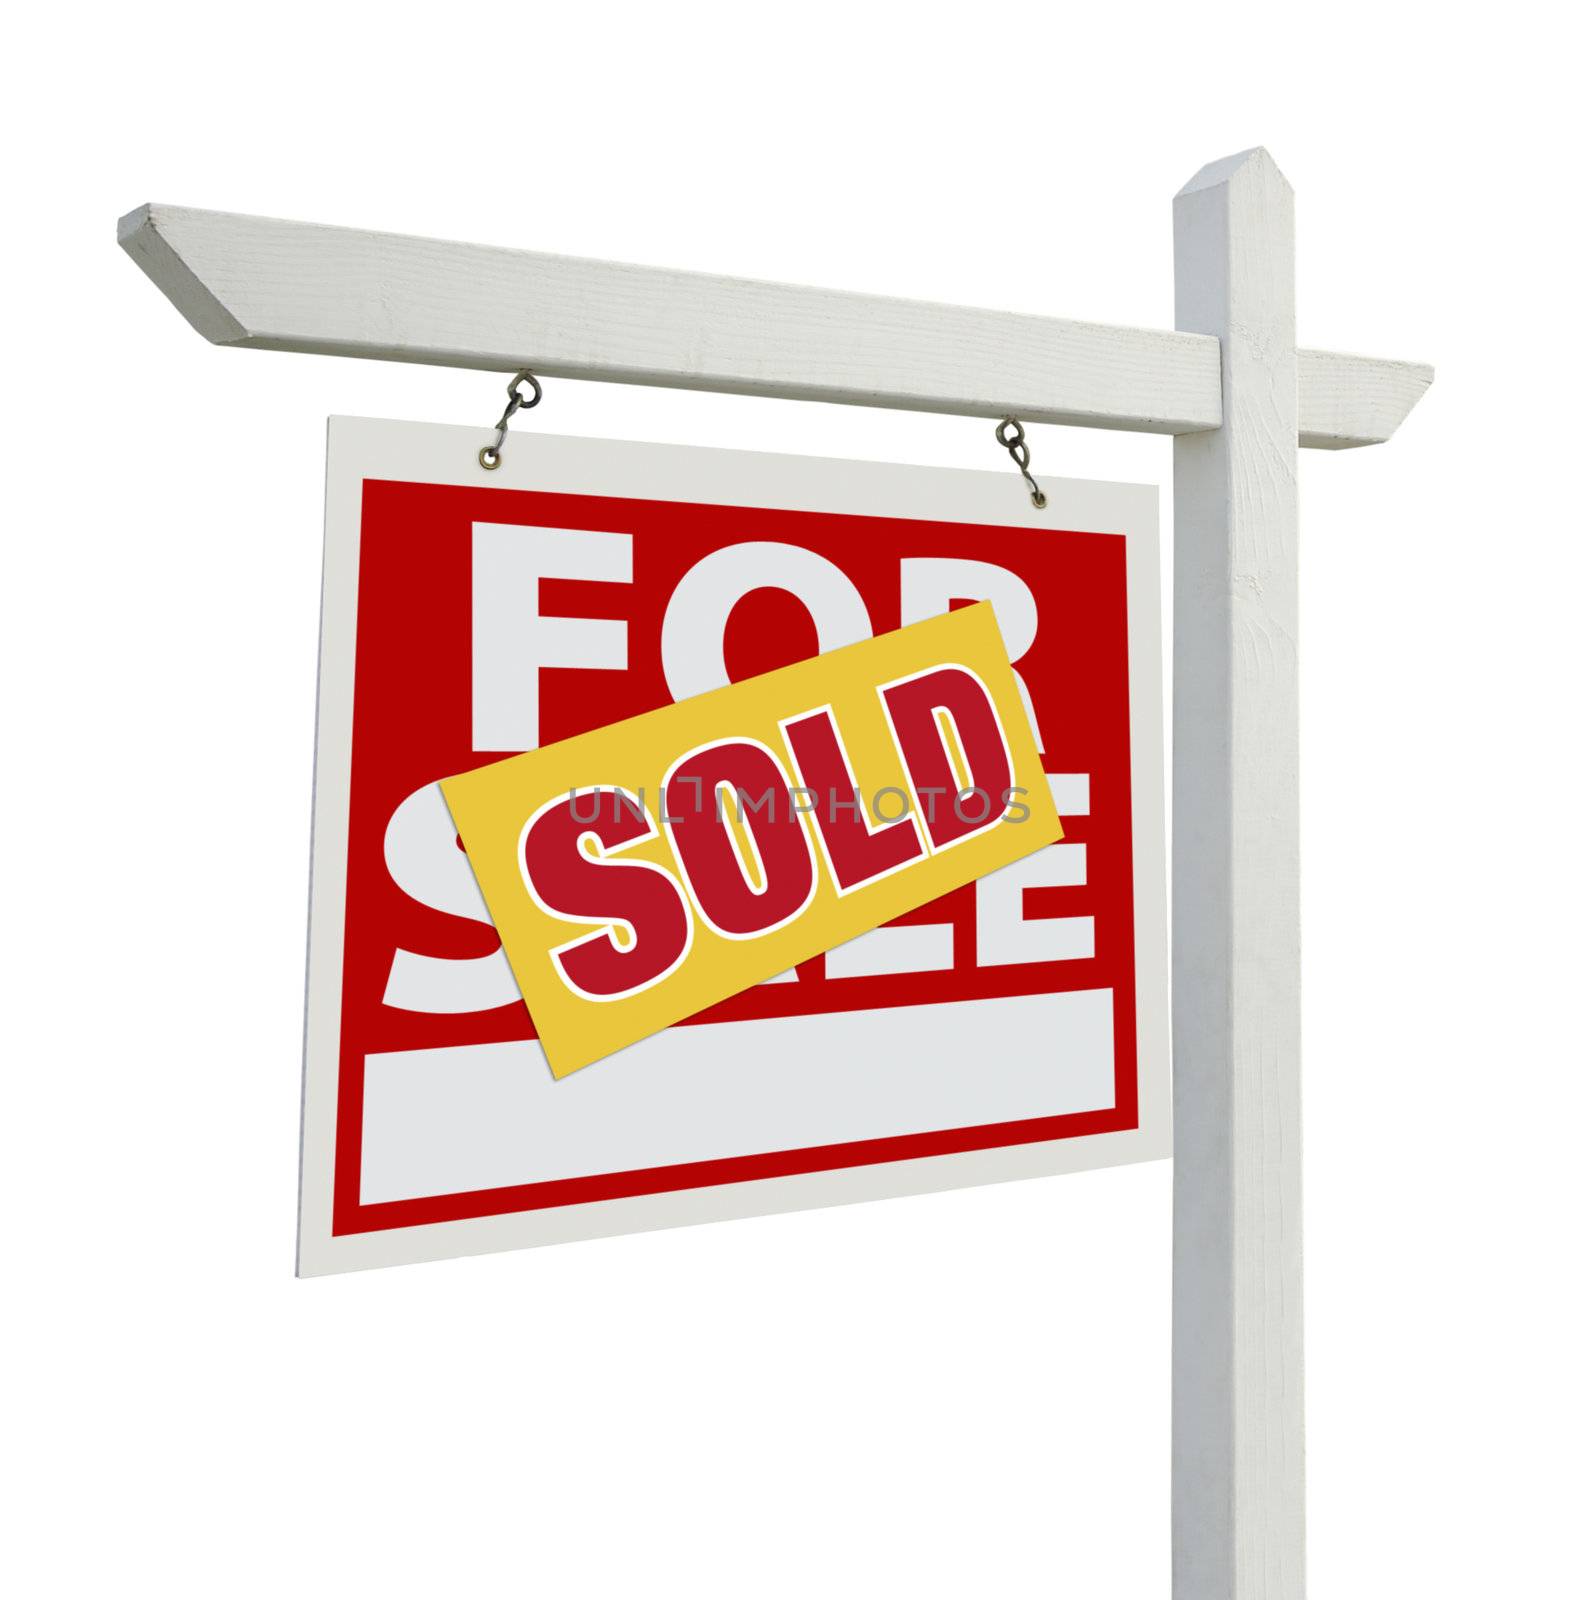 Sold Home For Sale Real Estate Sign Isolated on a White Background.